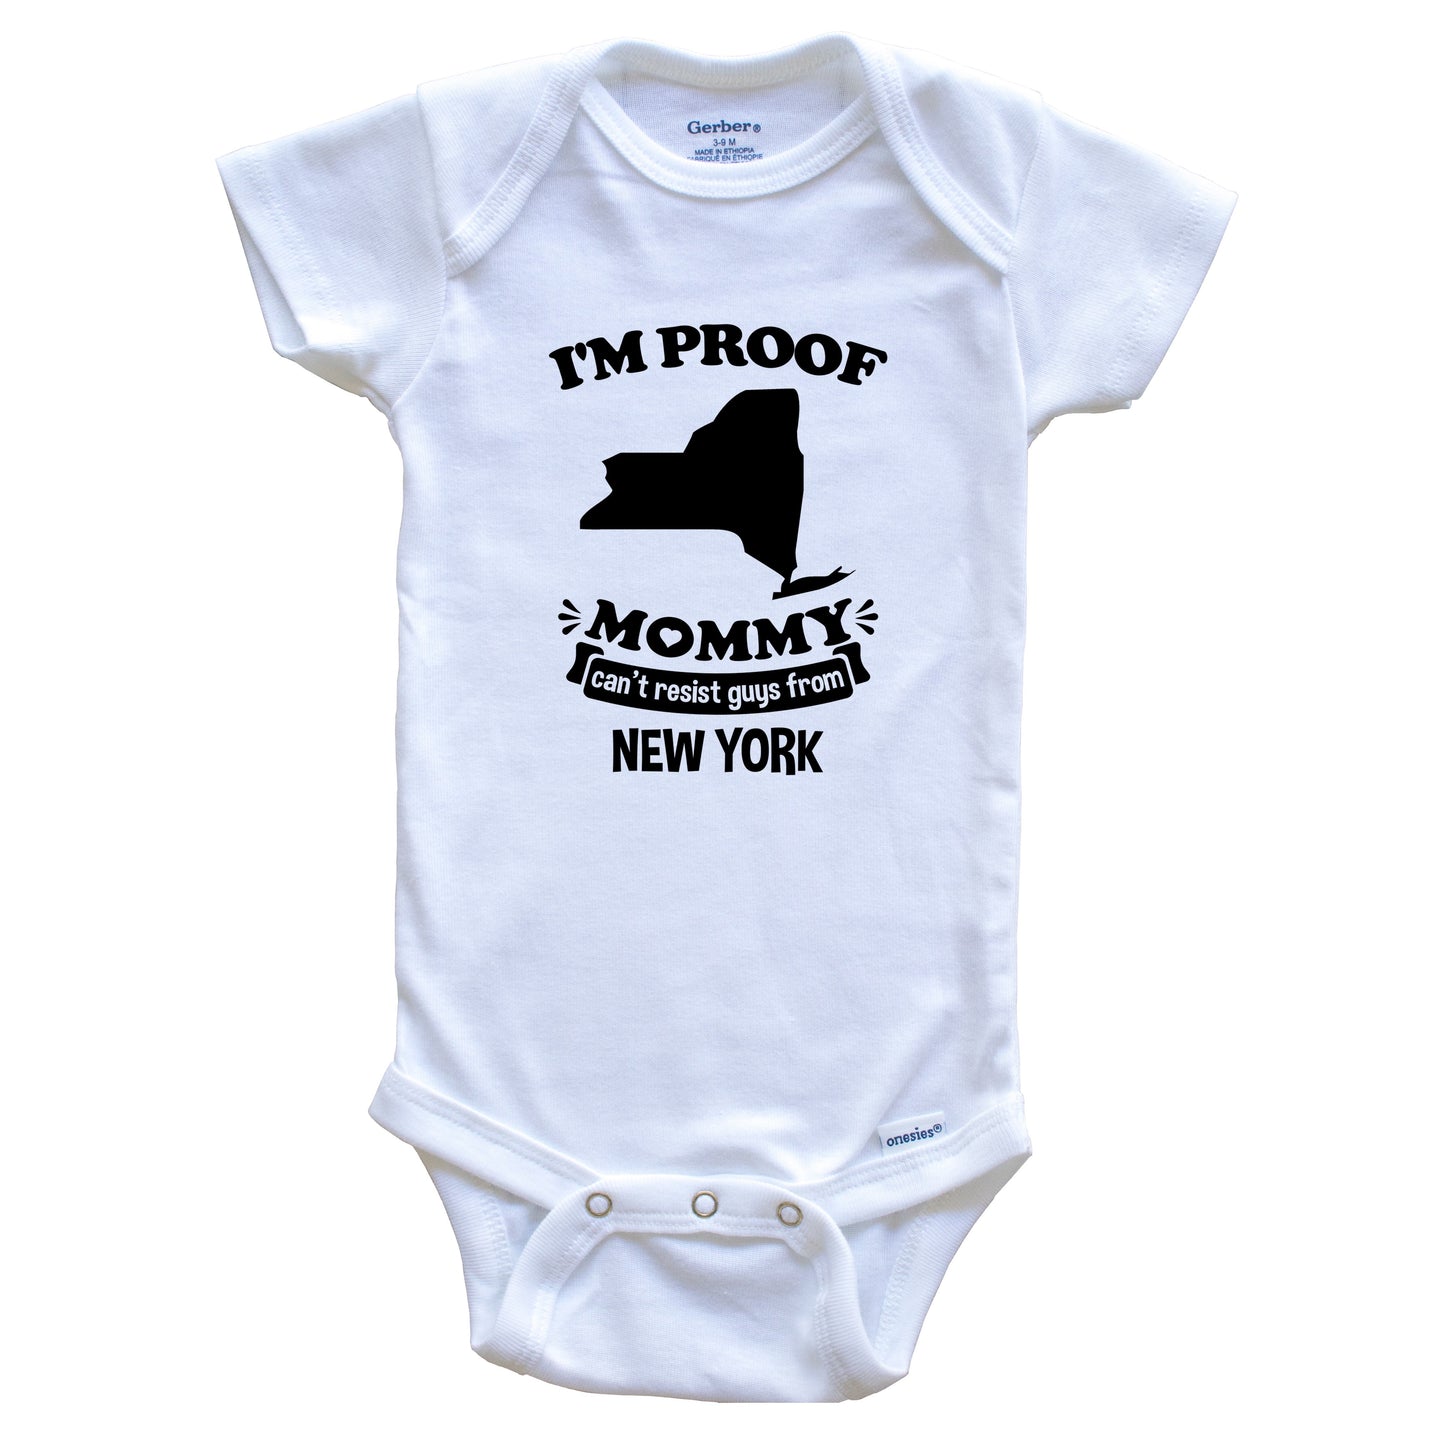 I'm Proof Mommy Can't Resist Guys From New York Baby Onesie - Funny One Piece Baby Bodysuit